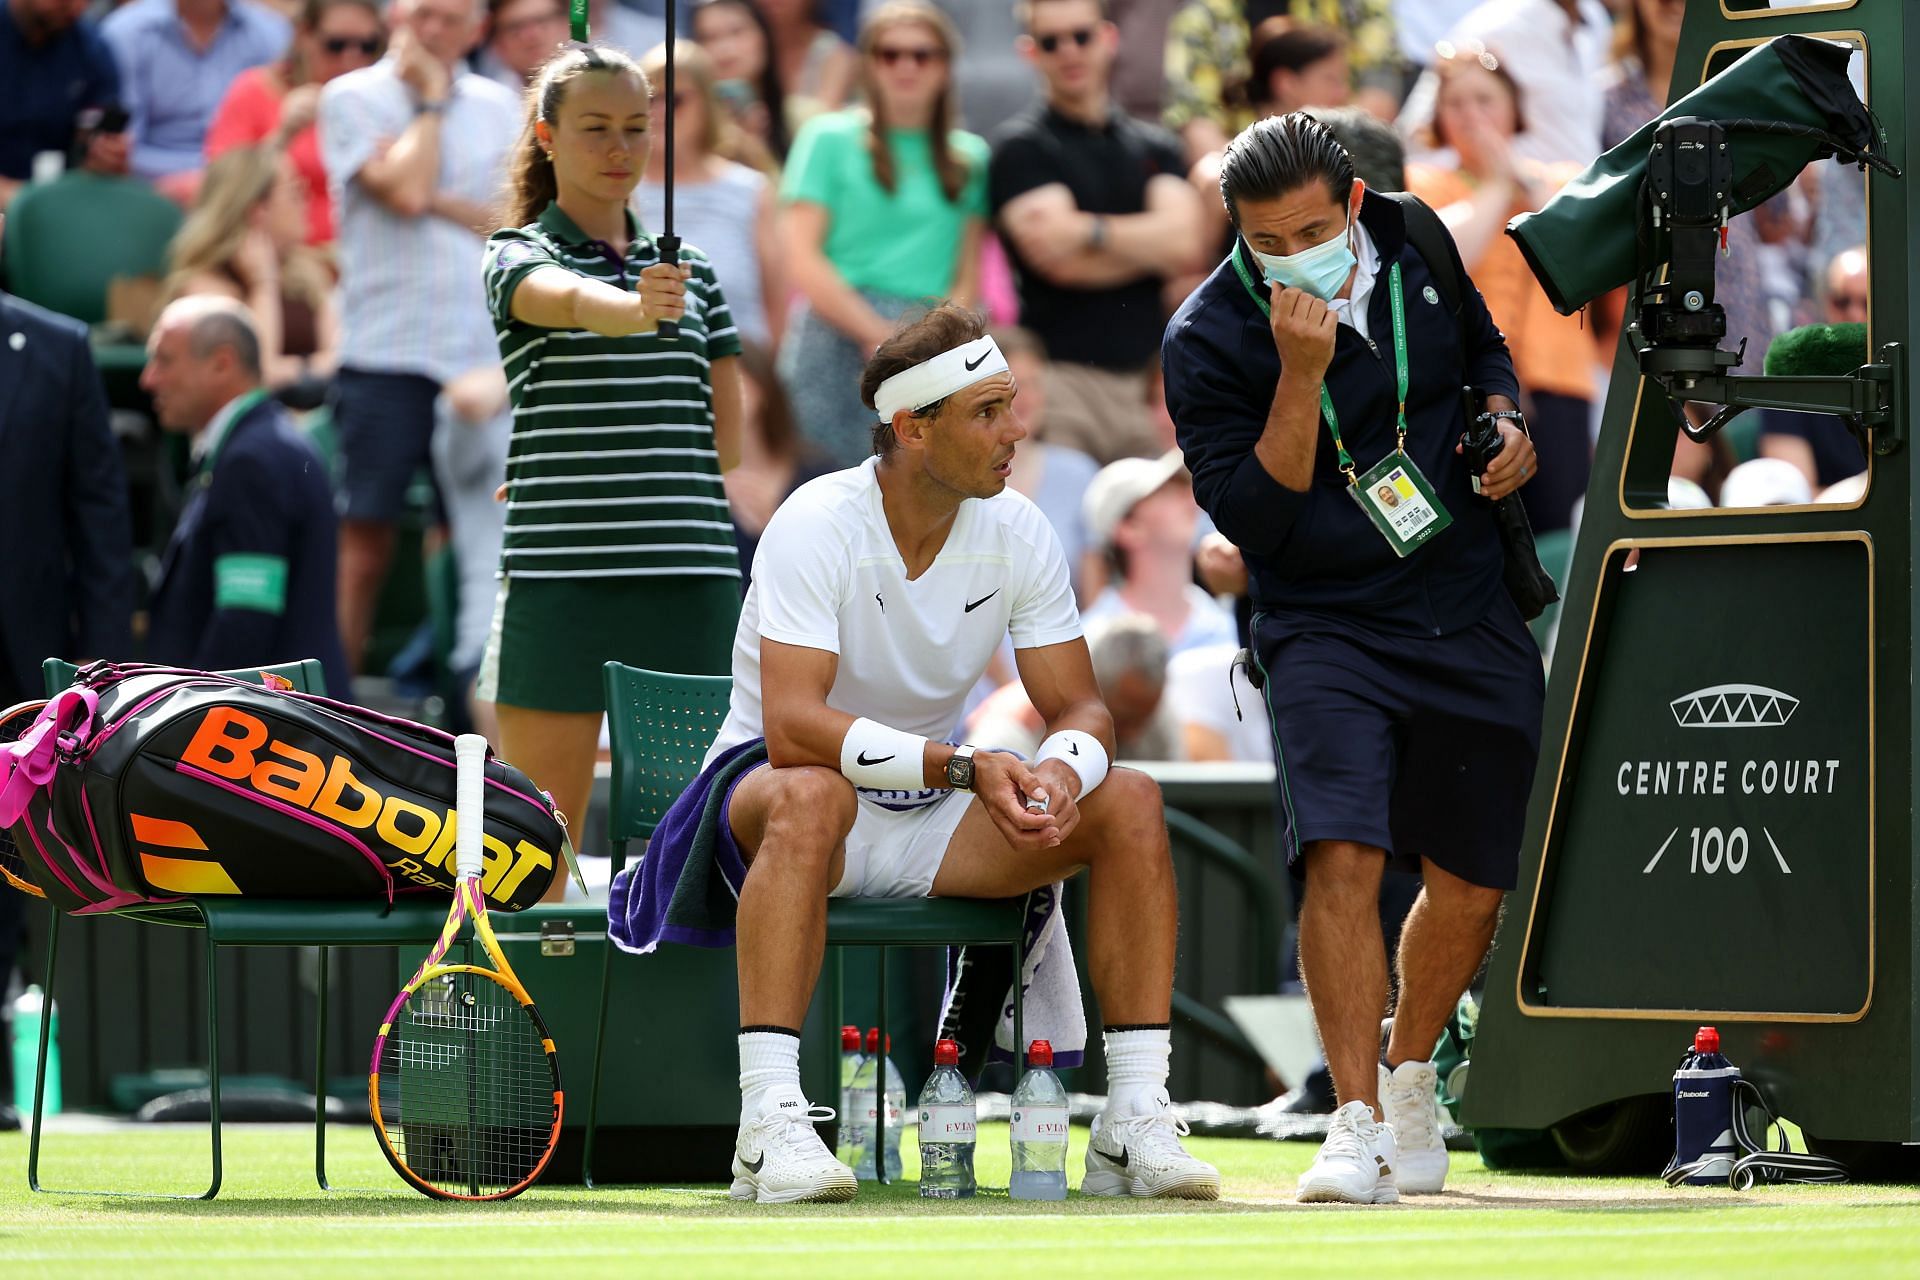 Nadal takes an injury break during his quarterfinal match at the 2022 Wimbledon Championships